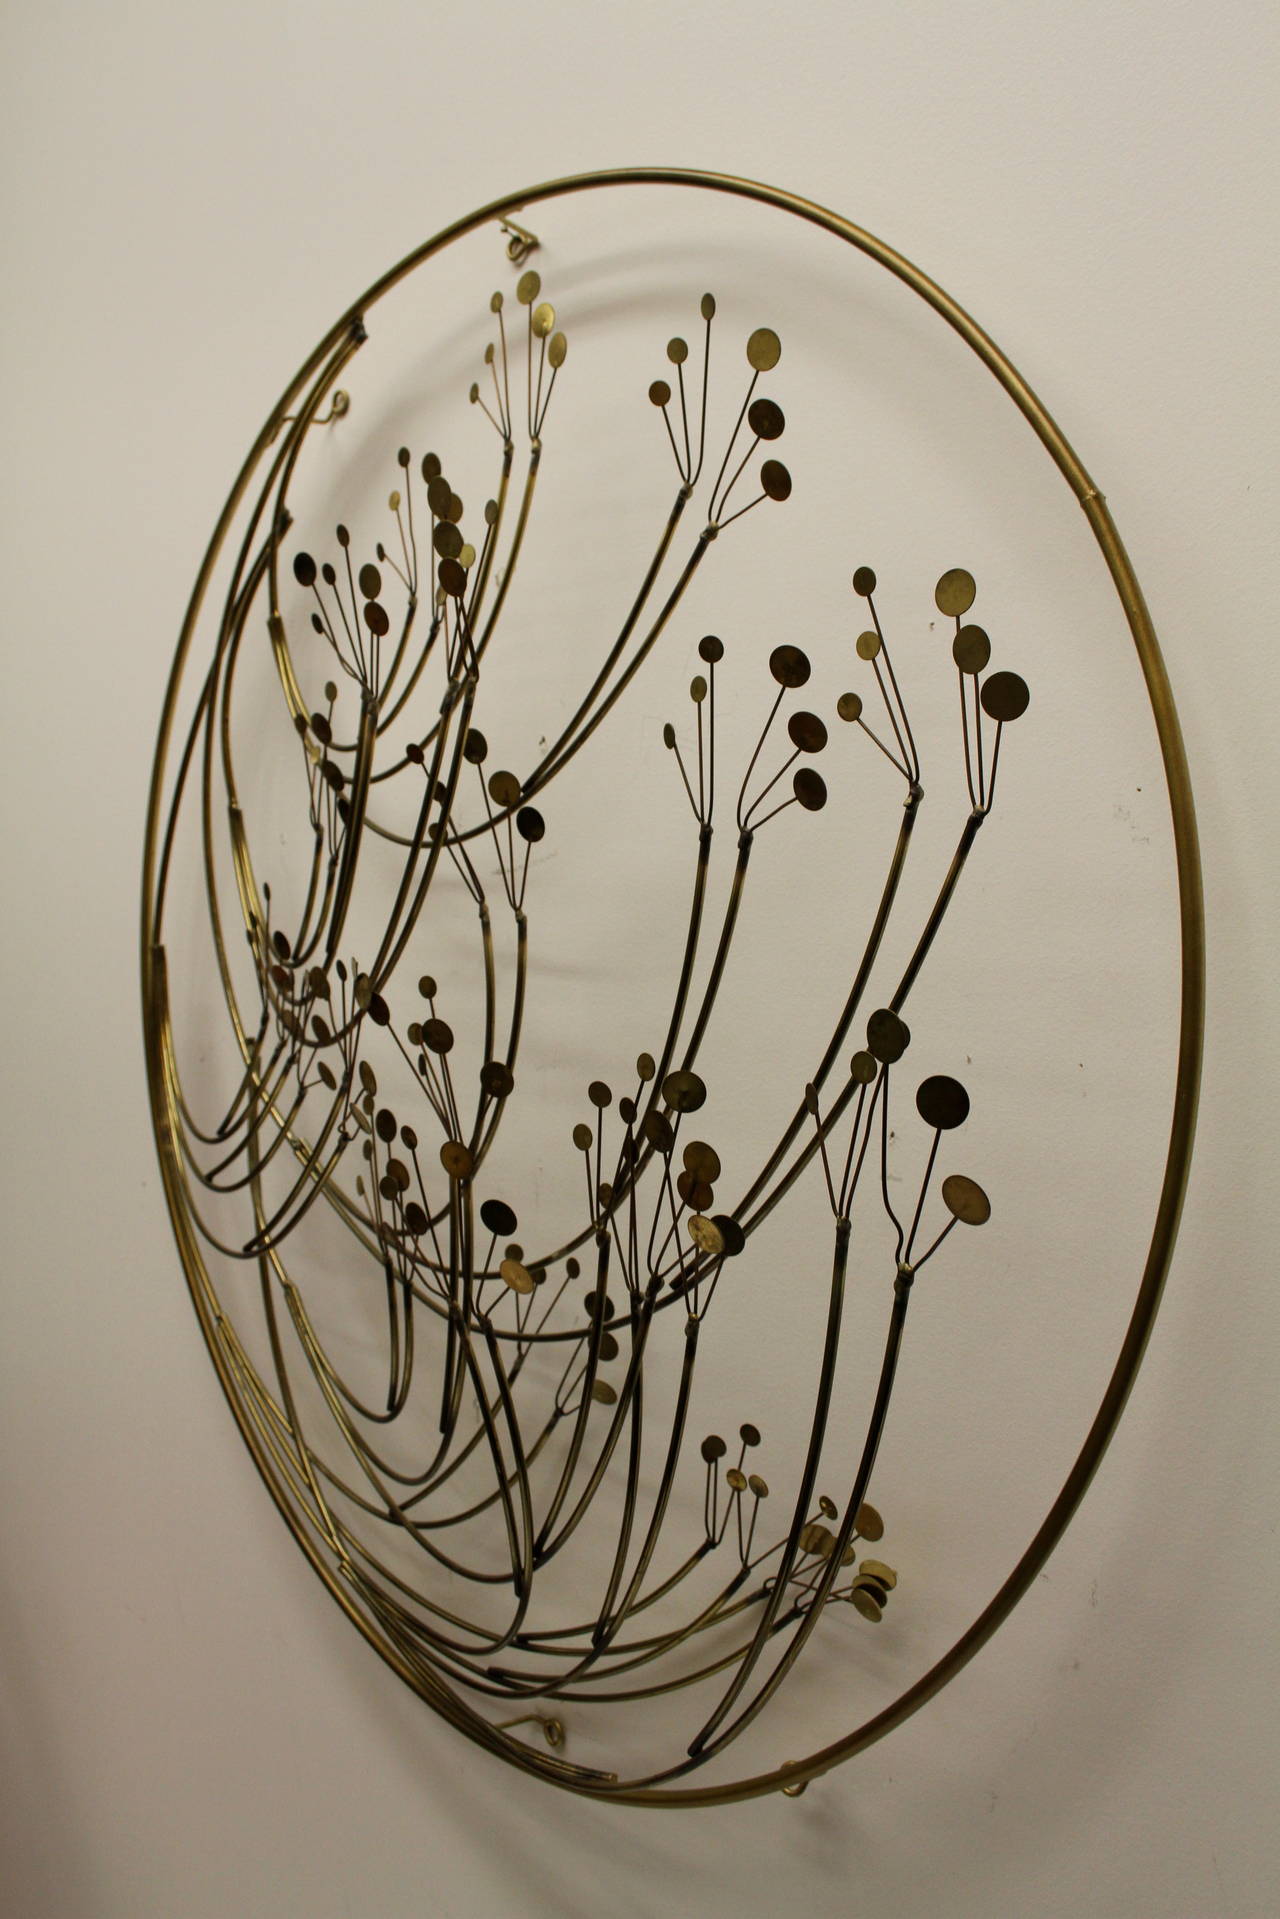 Late 20th Century C. Jere Circular Wall Sculpture Signed and Dated